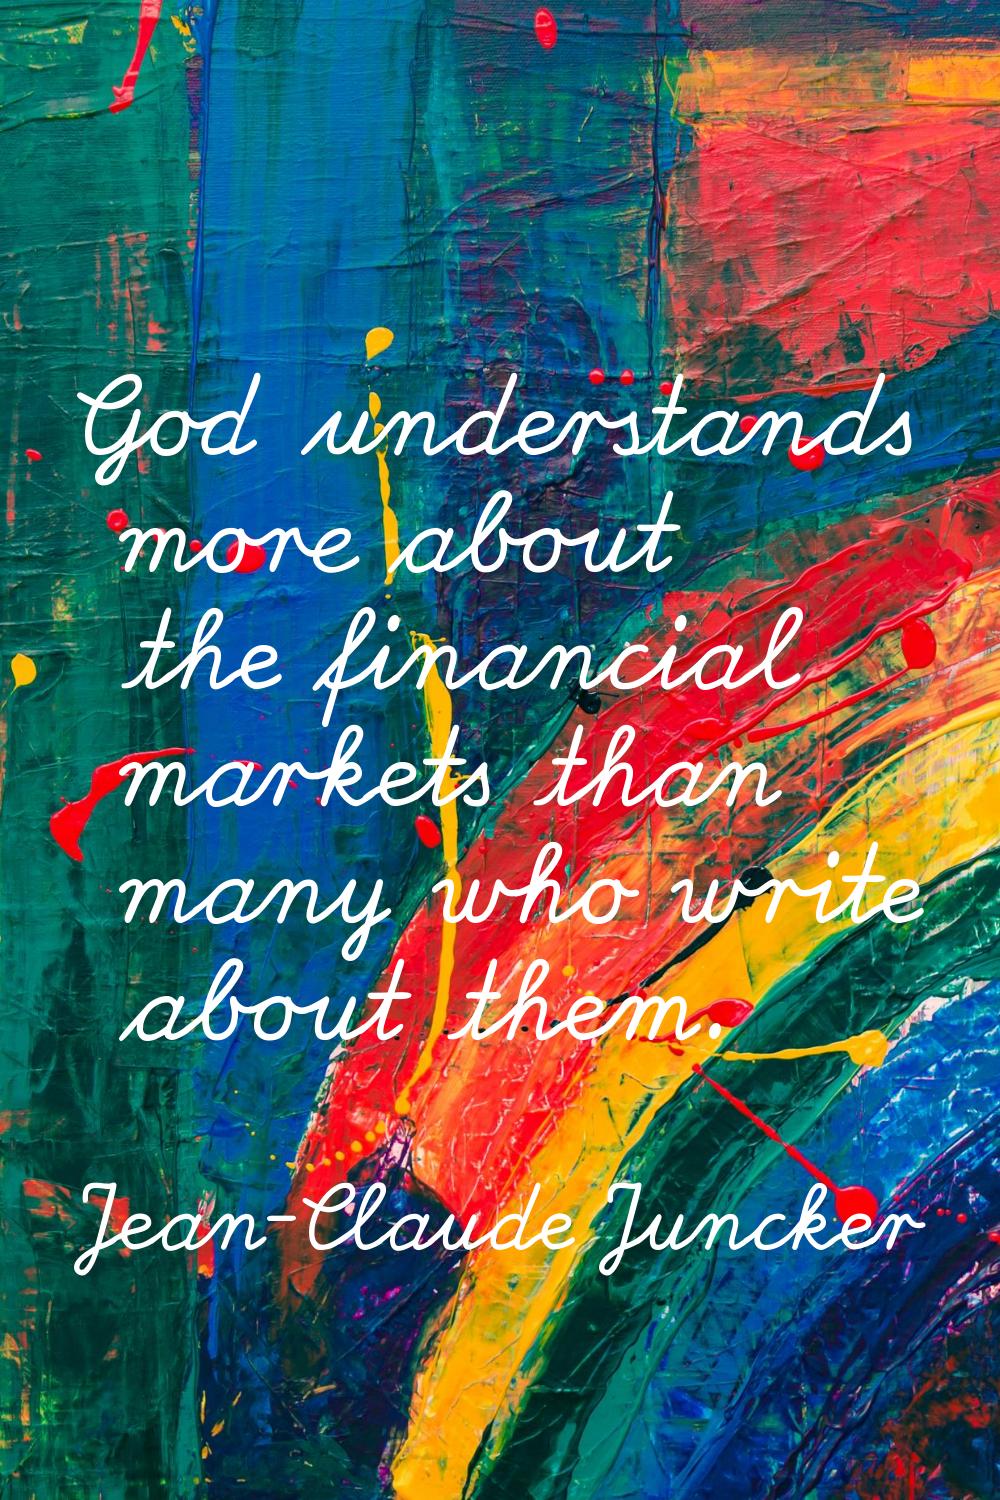 God understands more about the financial markets than many who write about them.